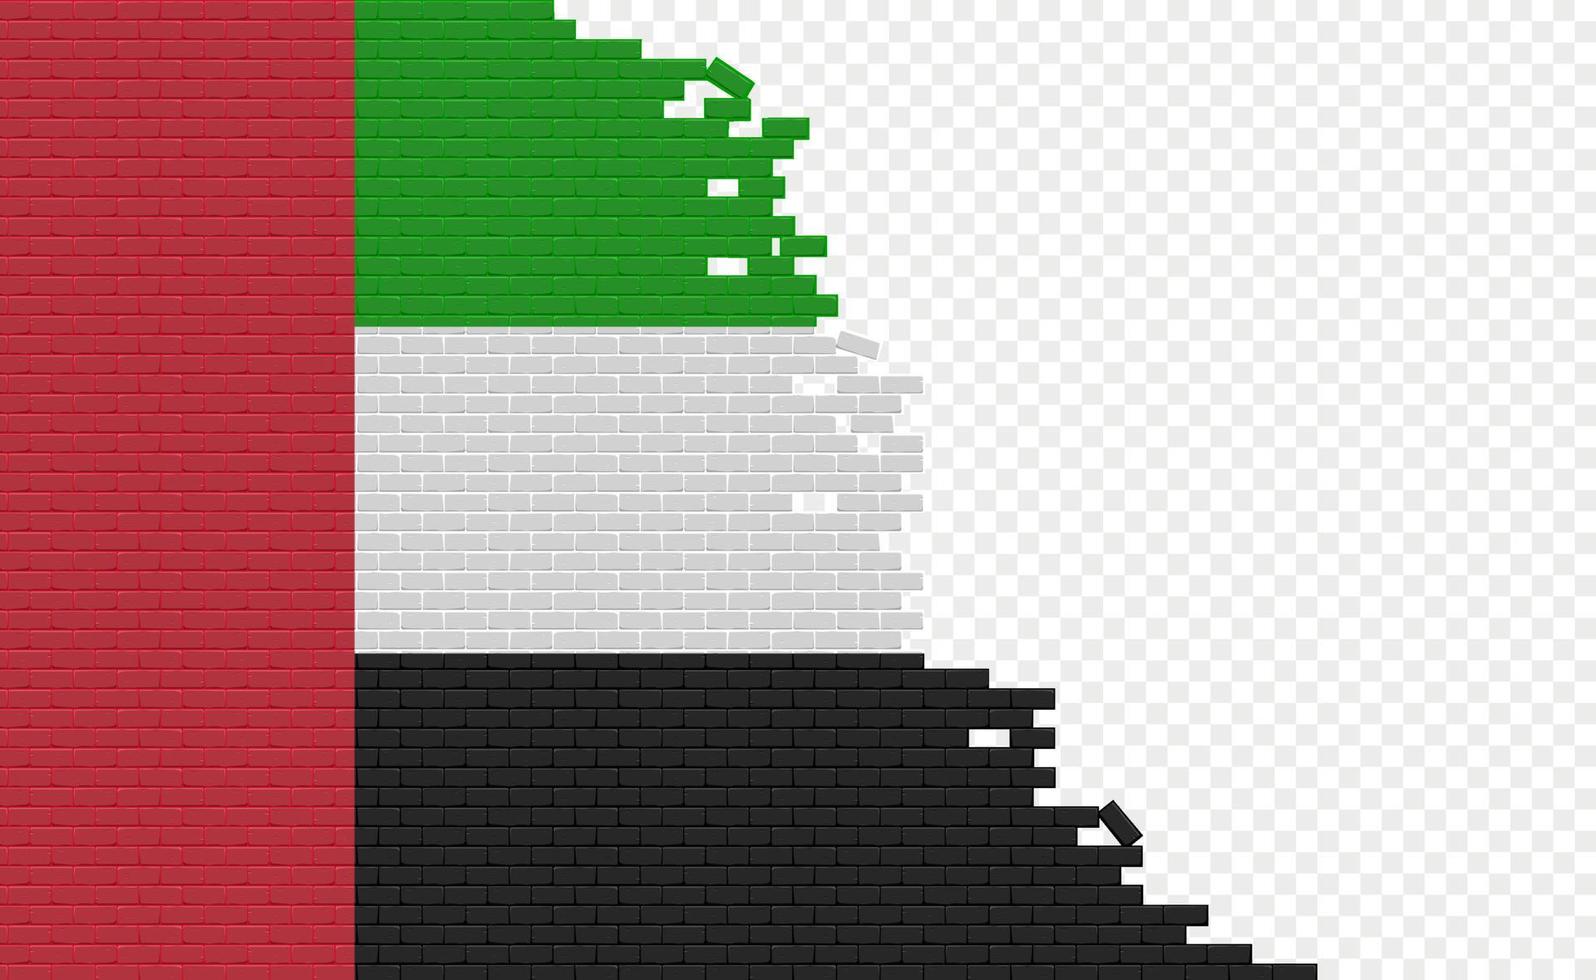 United Arab Emirates flag on broken brick wall. Empty flag field of another country. Country comparison. Easy editing and vector in groups.